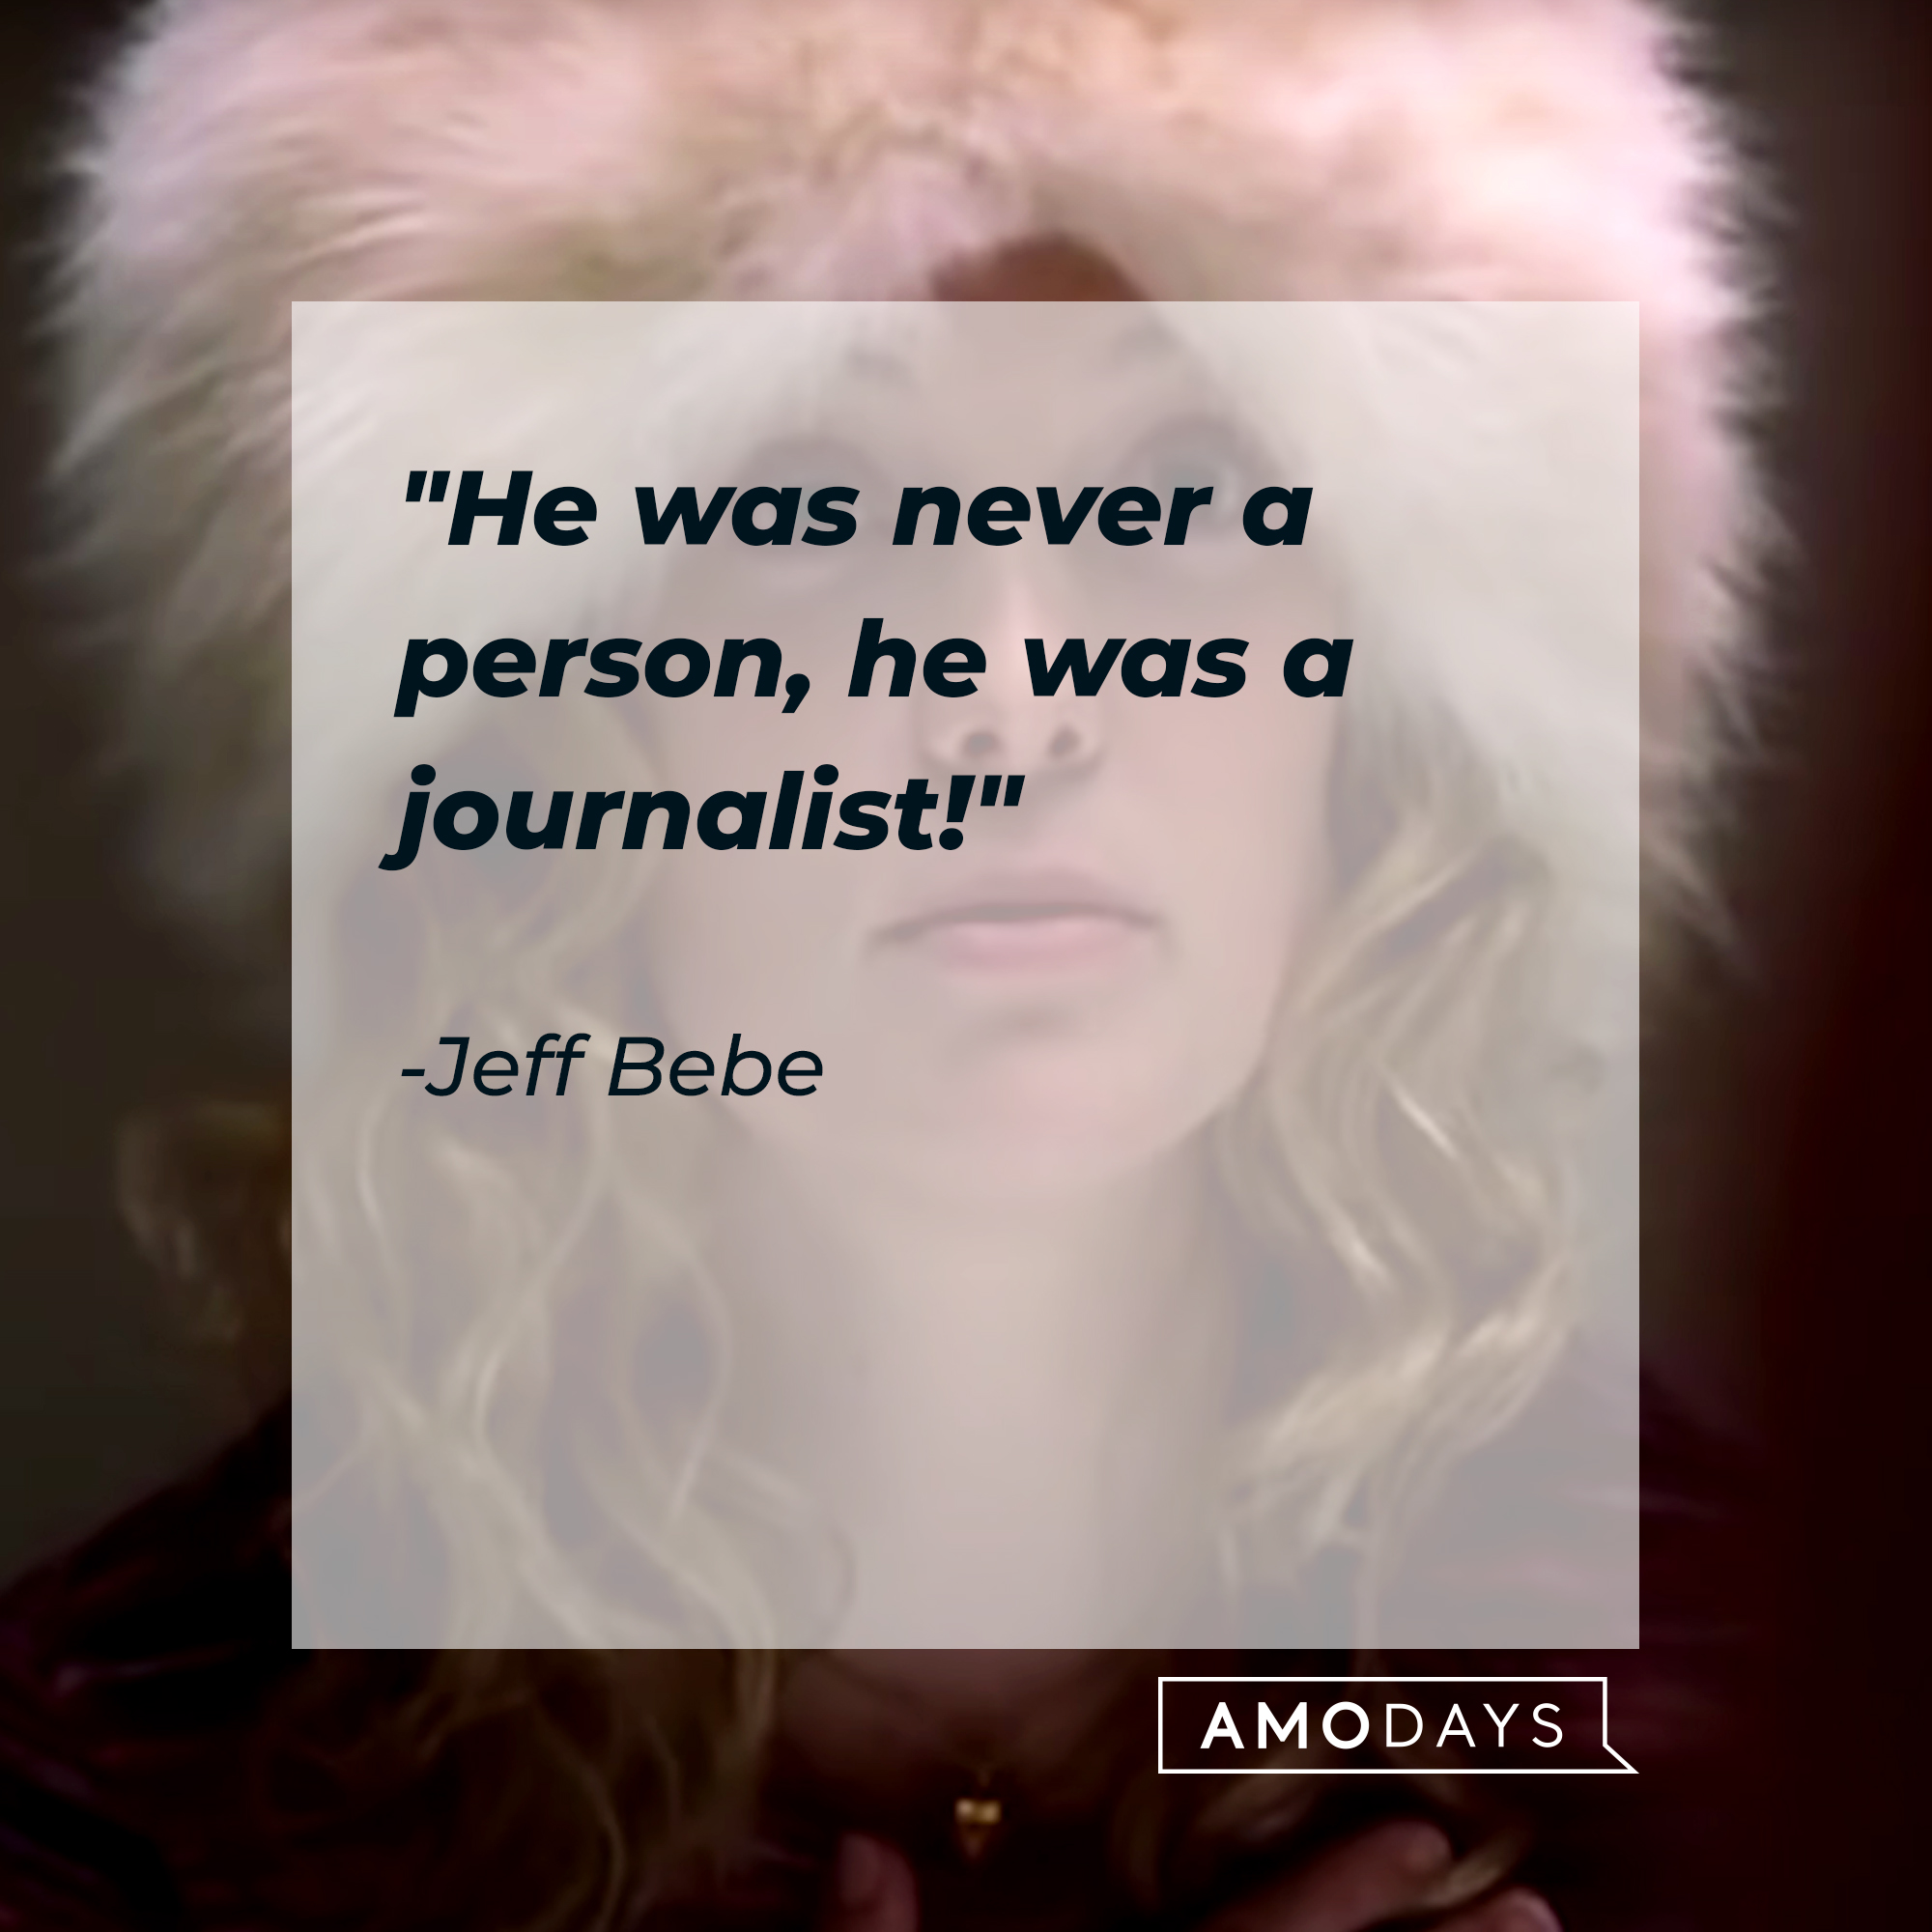 Jeff Bebe's quote: "He was never a person, he was a journalist!" | Source: Facebook/AlmostFamousTheMovie